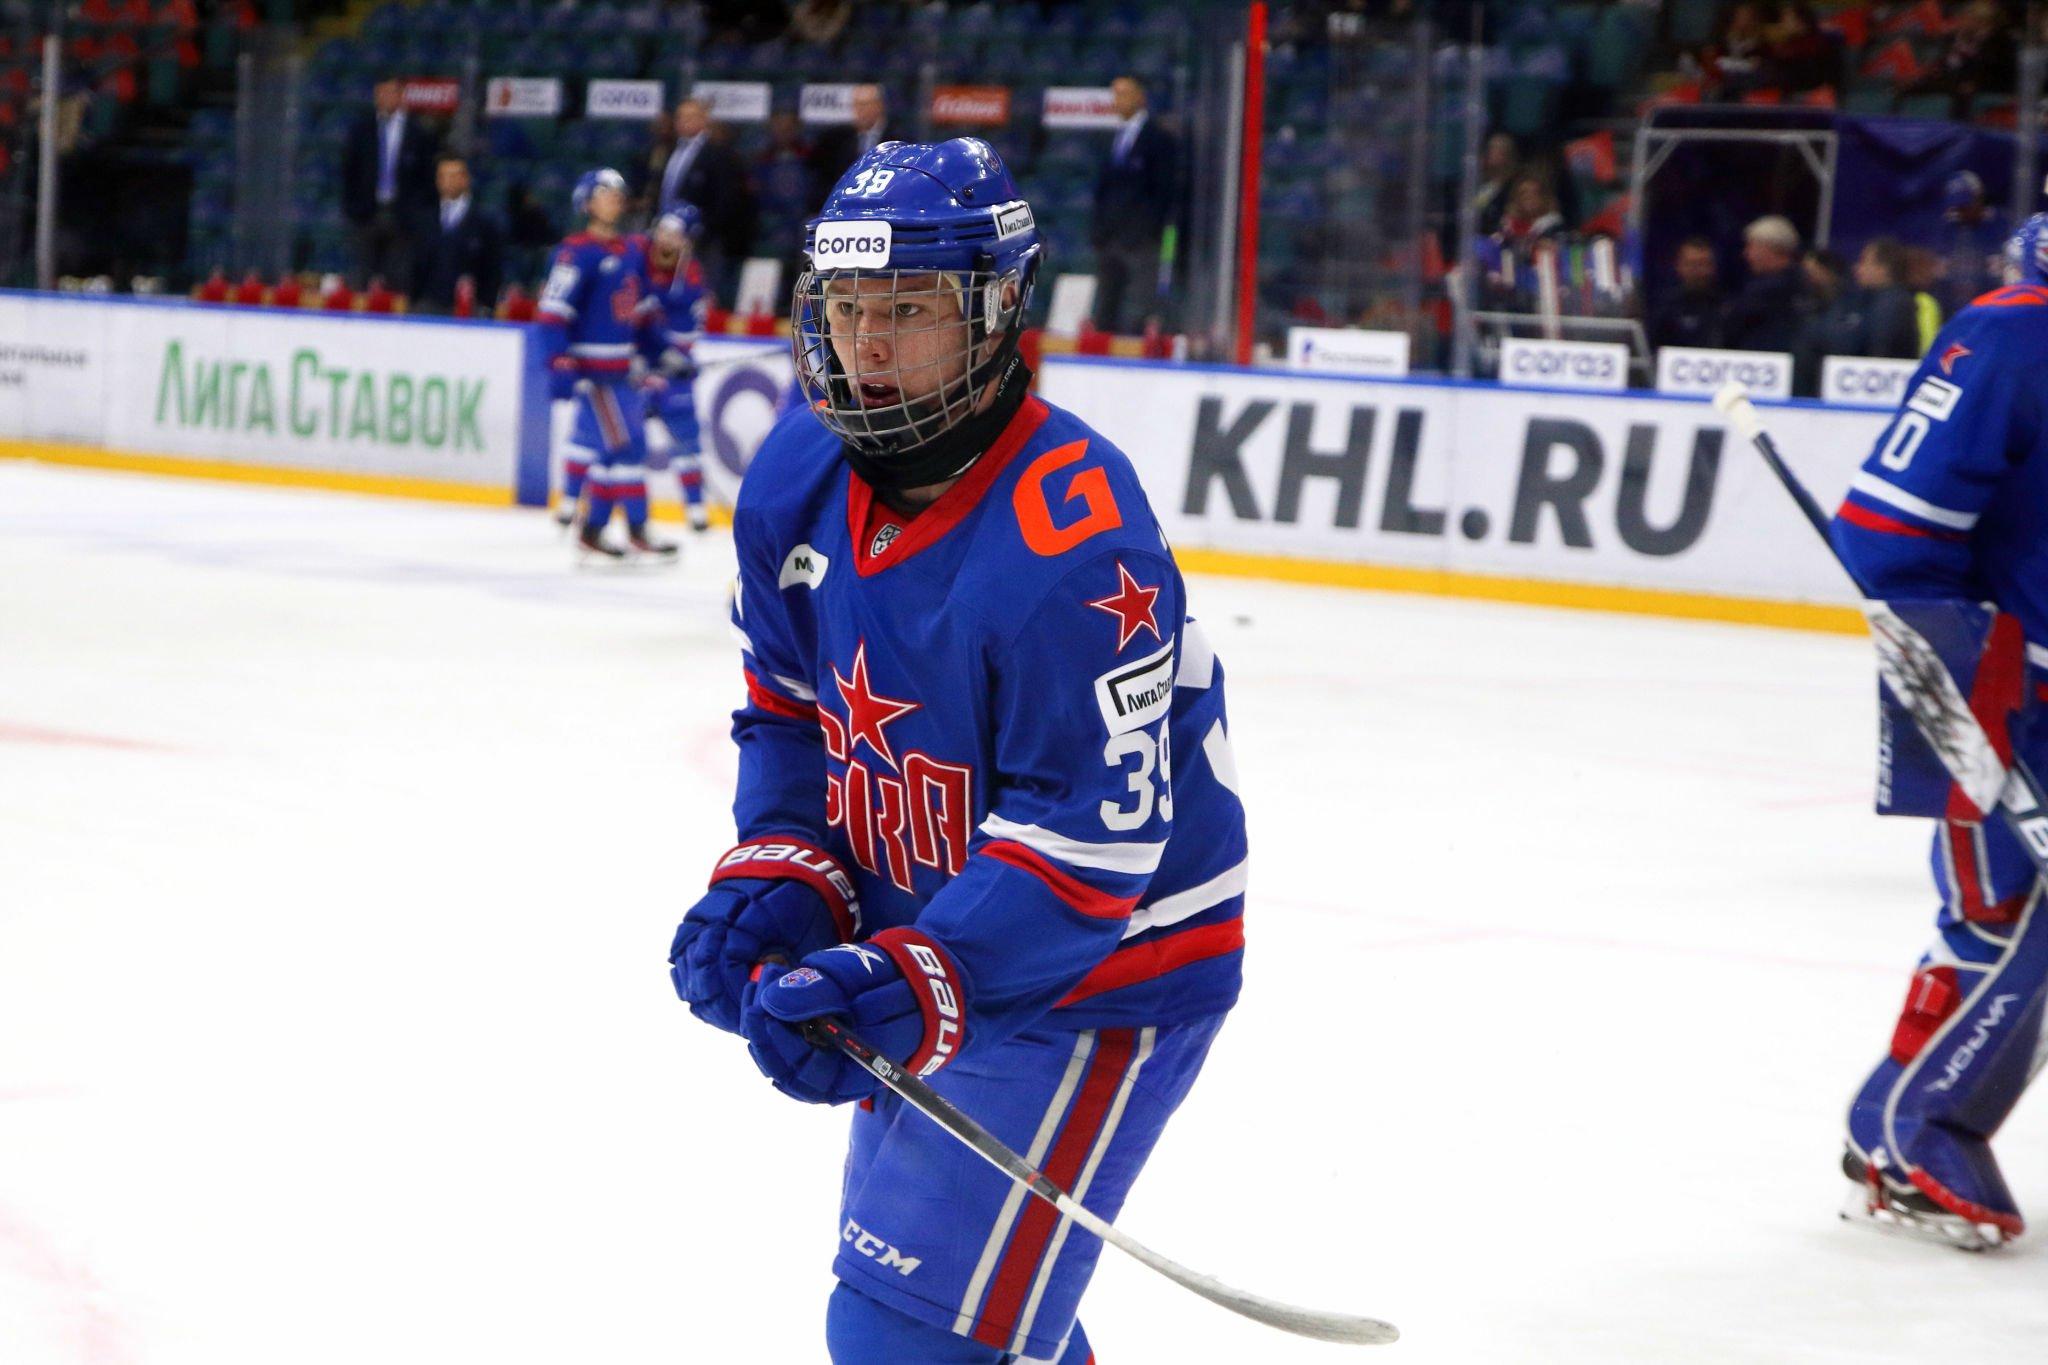 Michkov Looking to Transition to the Centre Position -